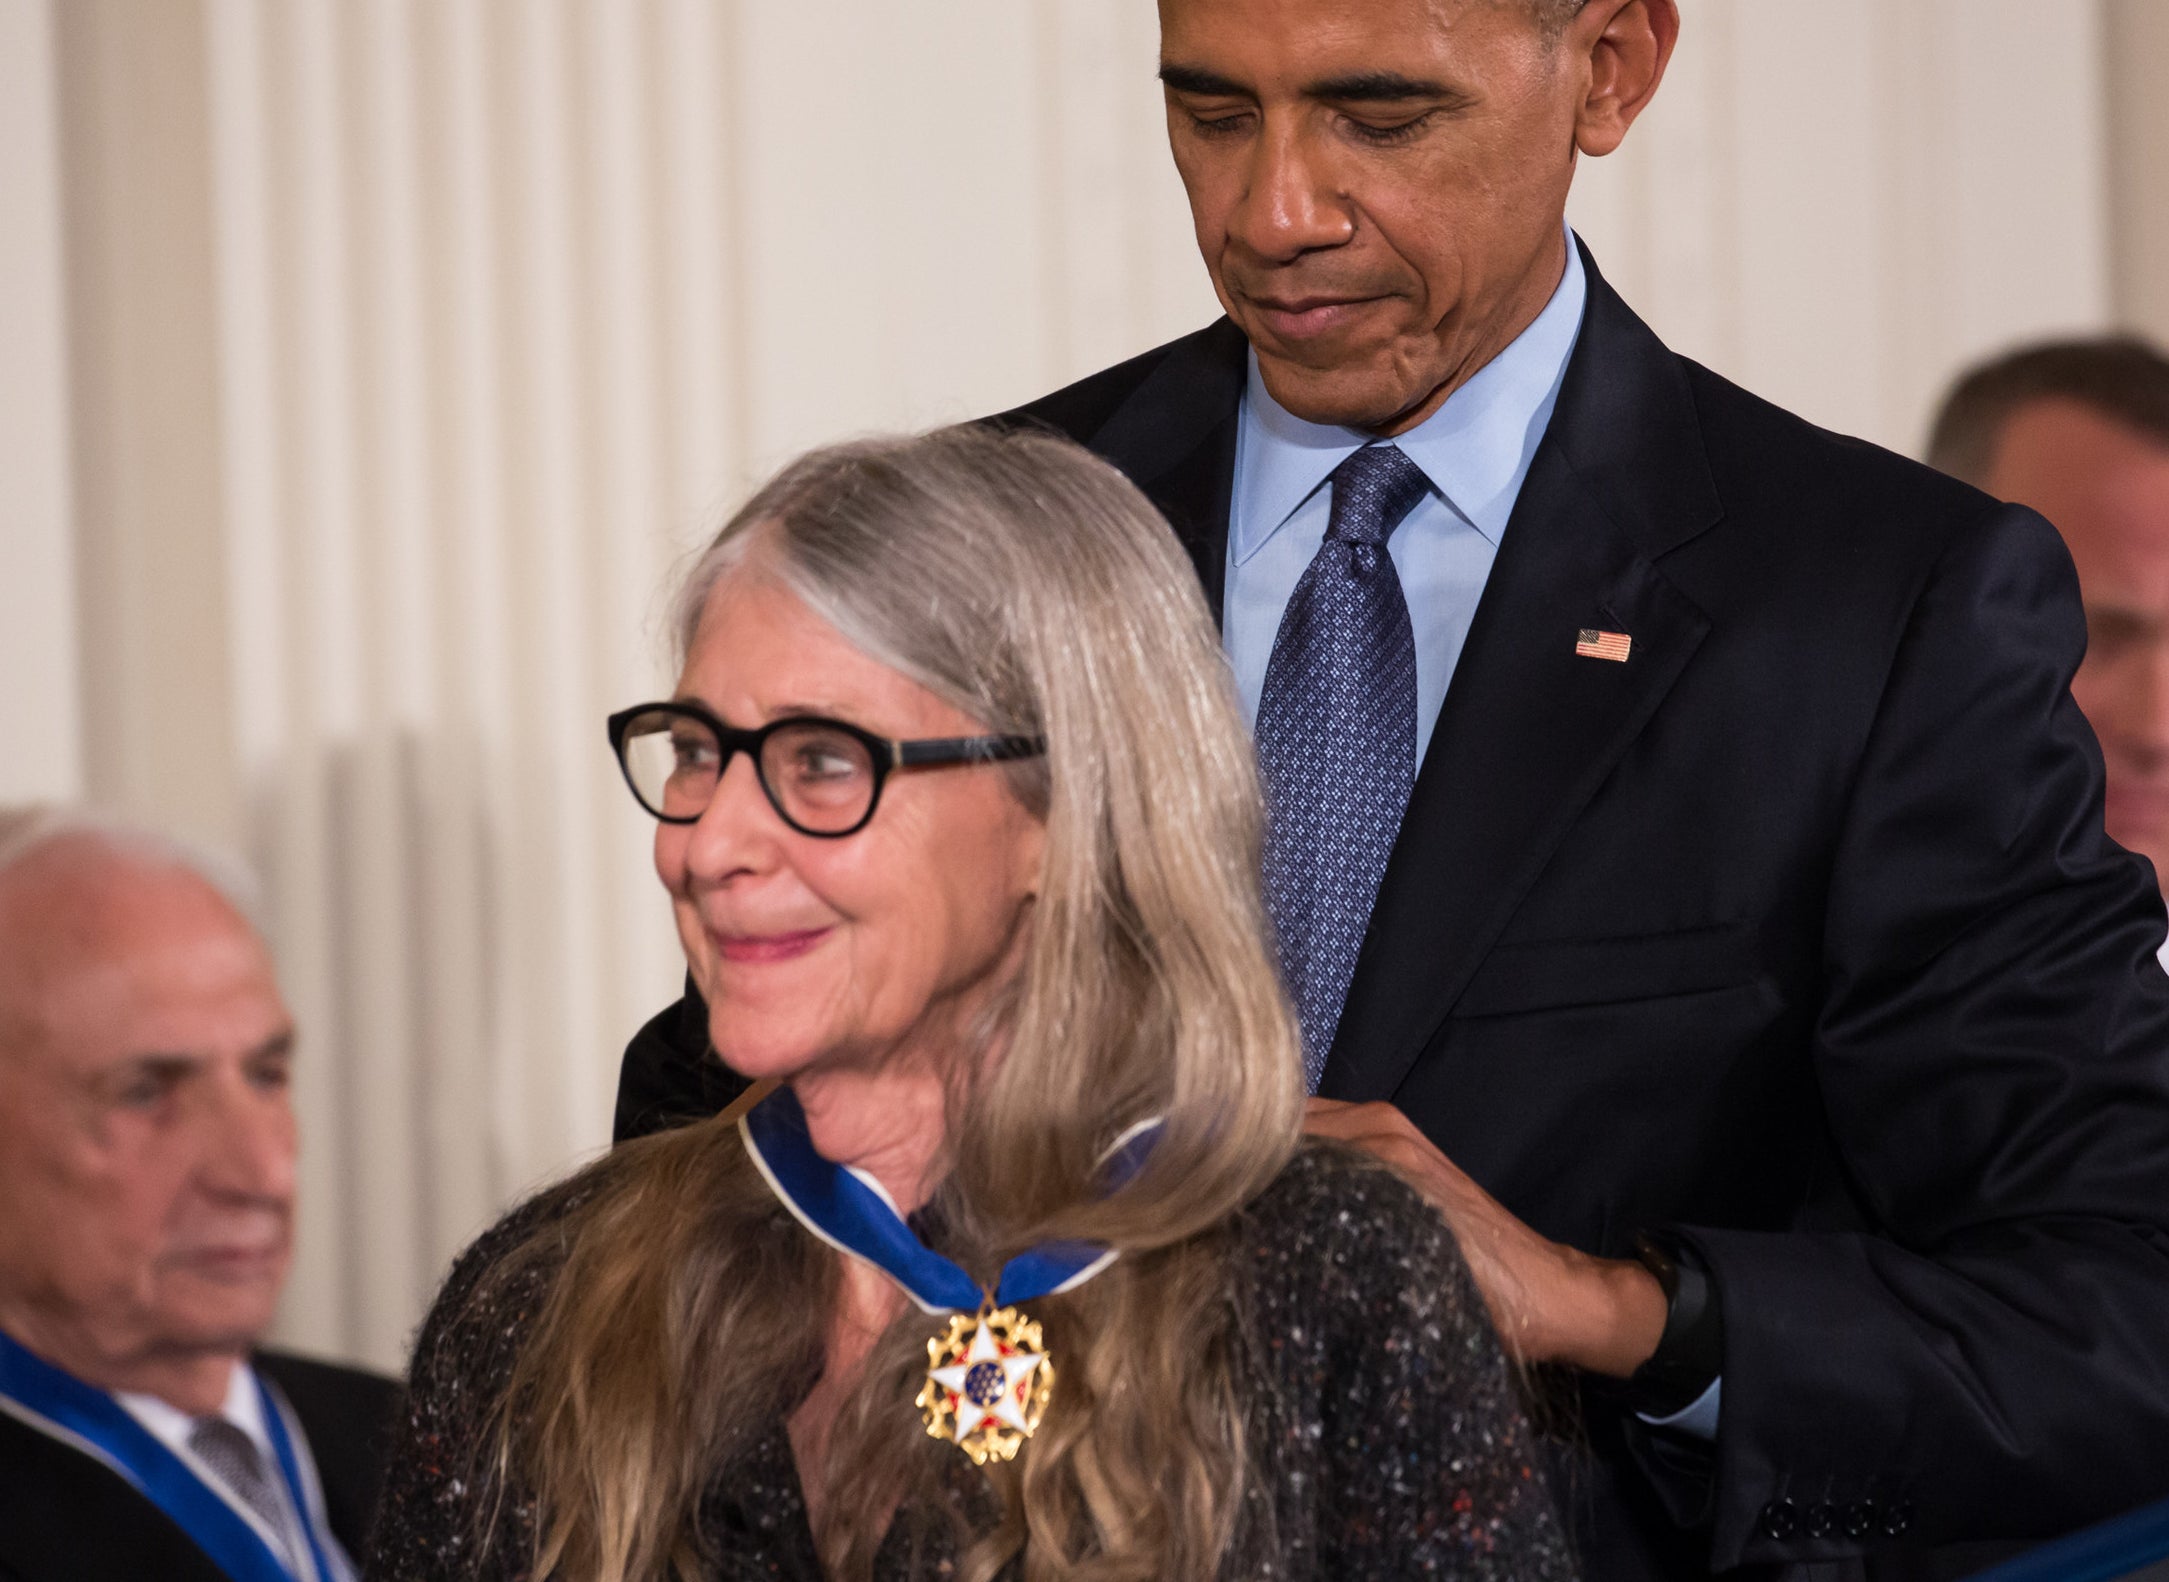 President Barack Obama placing the Presidential Medal of Freedom on Margaret Hamilton, who is smiling